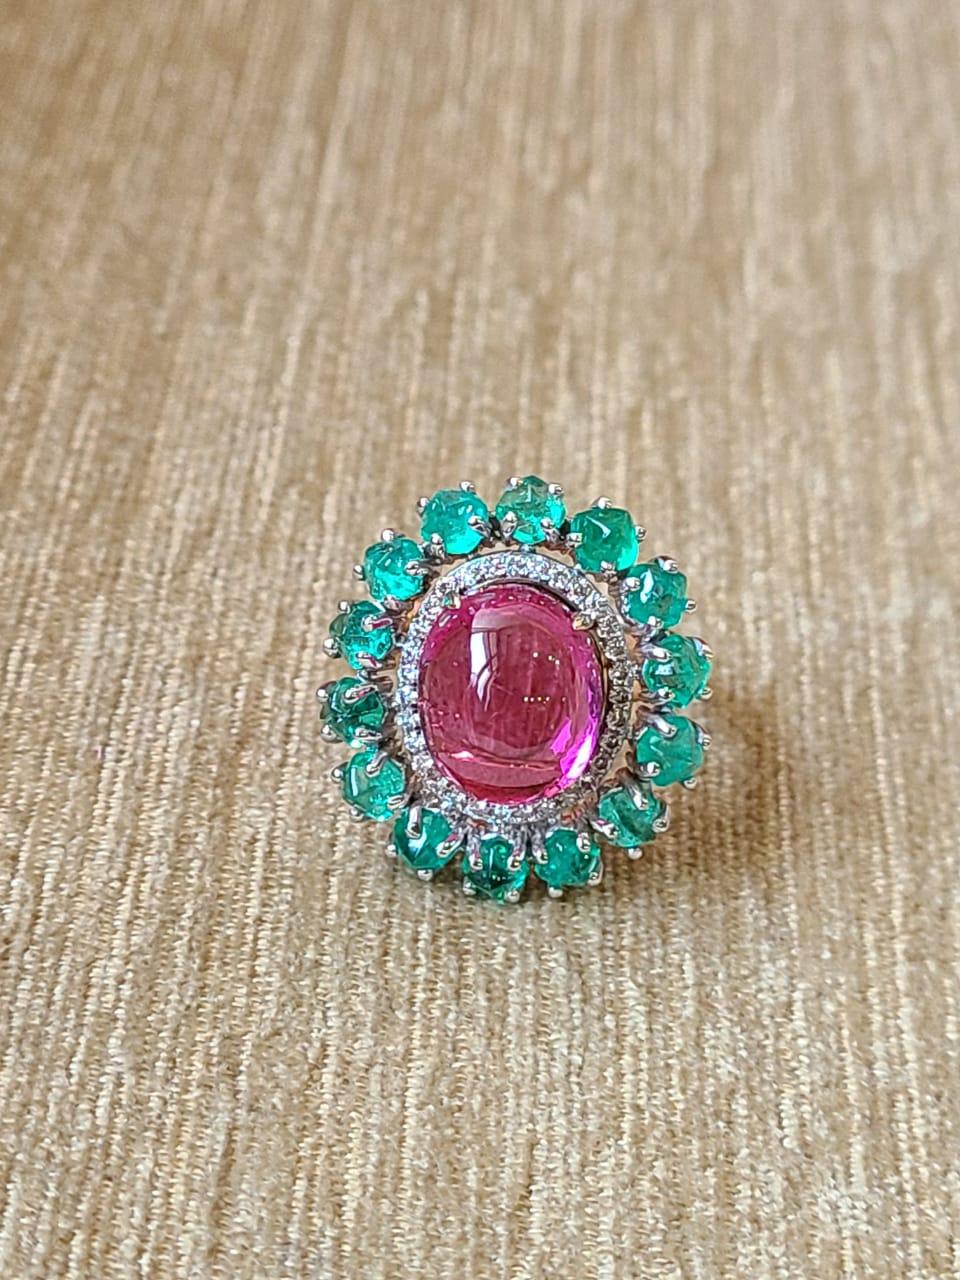 A very gorgeous and one of a kind, Rubellite & Emerald Cocktail / Dome Ring set in 18K Gold & Diamonds. The weight of the Rubellite is 7.42 carats. The weight of the Emerald is 2.99 carats. The Emerald is completely natural, without any treatment &